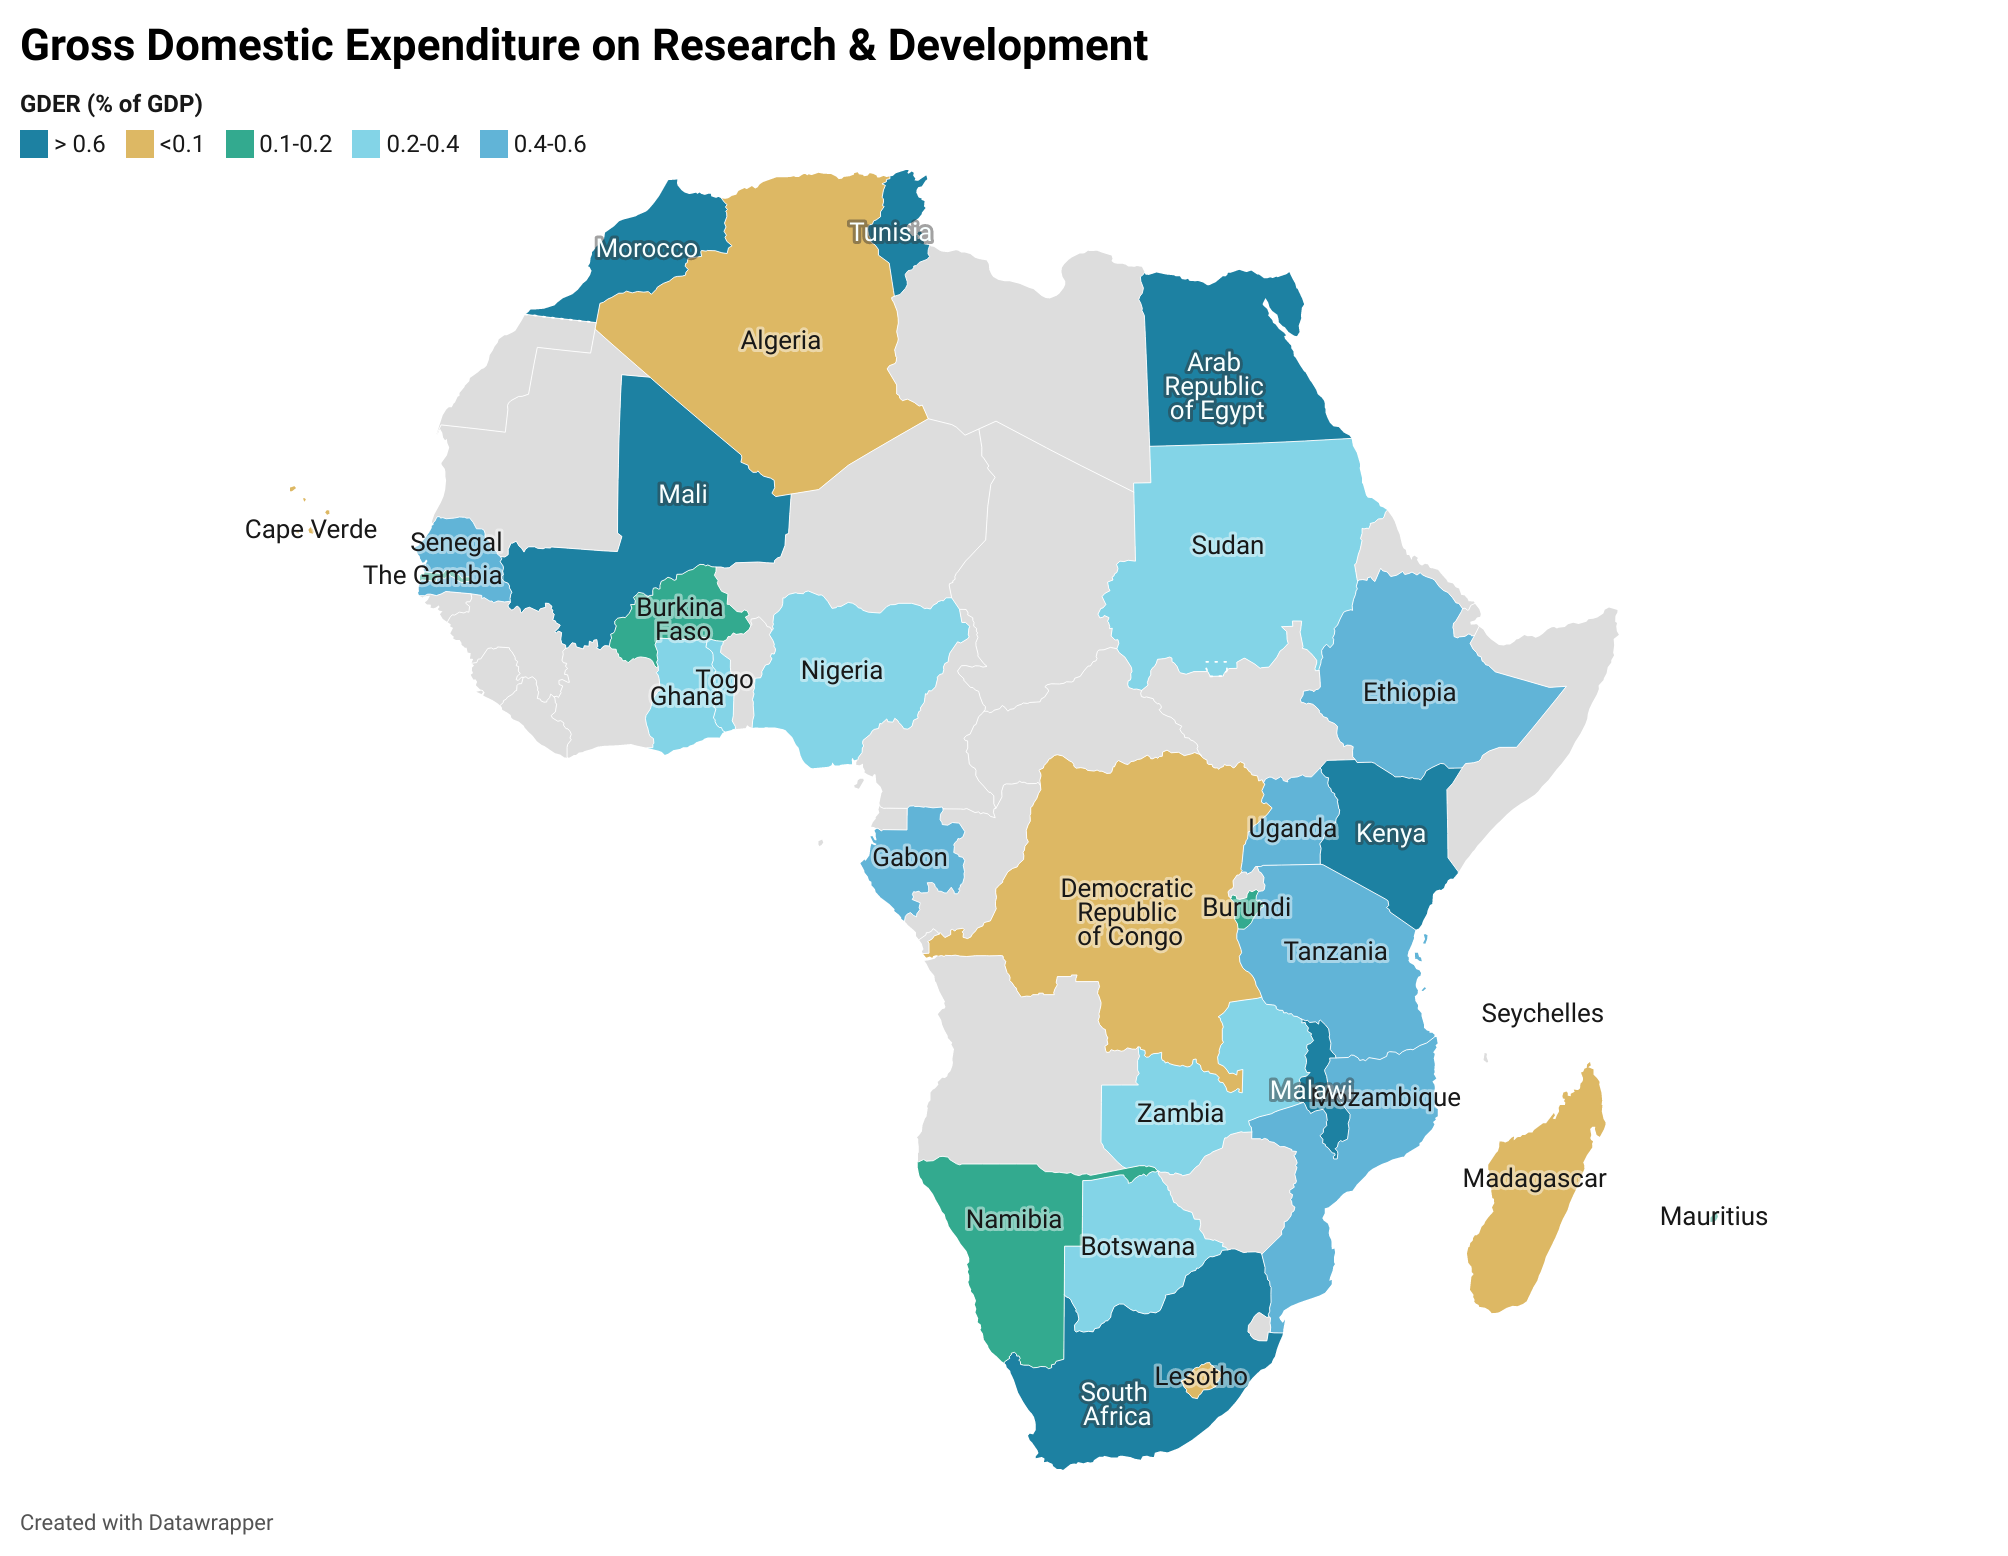 Gross domestic expenditure on research and development